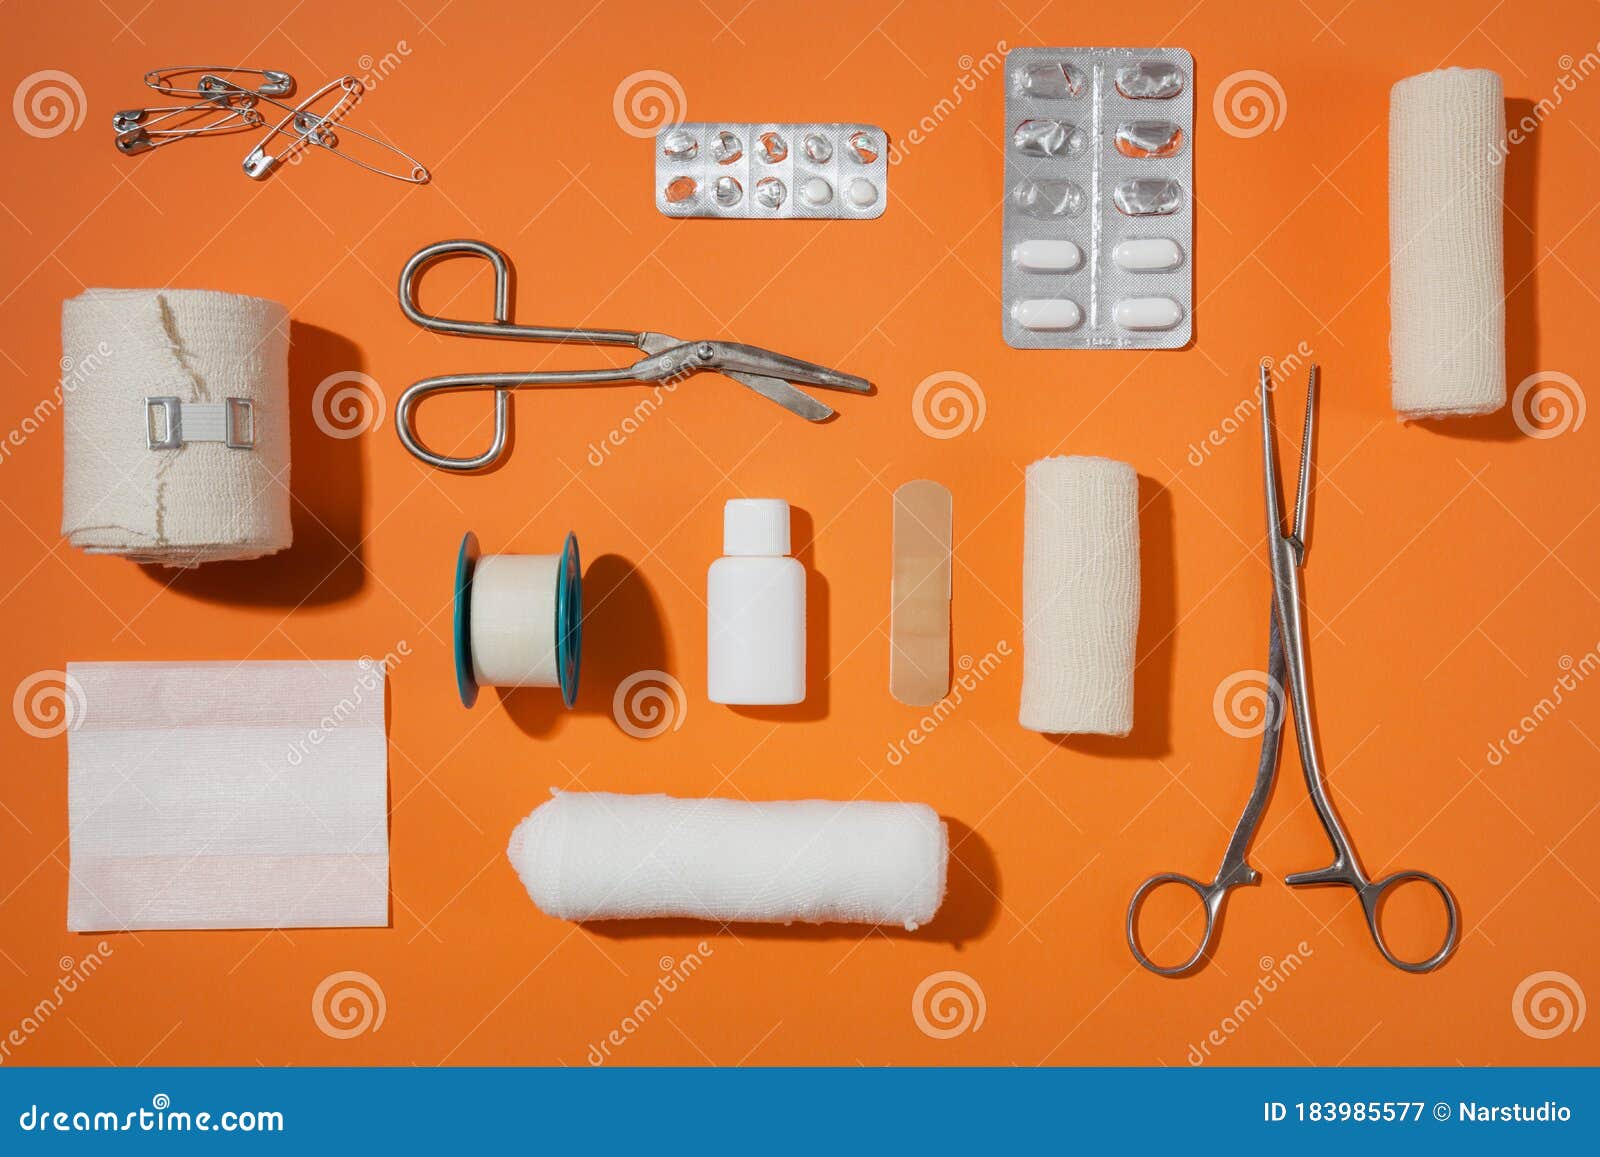 Flat Lay of First Aid Kit Items. Stock Image - Image of pain